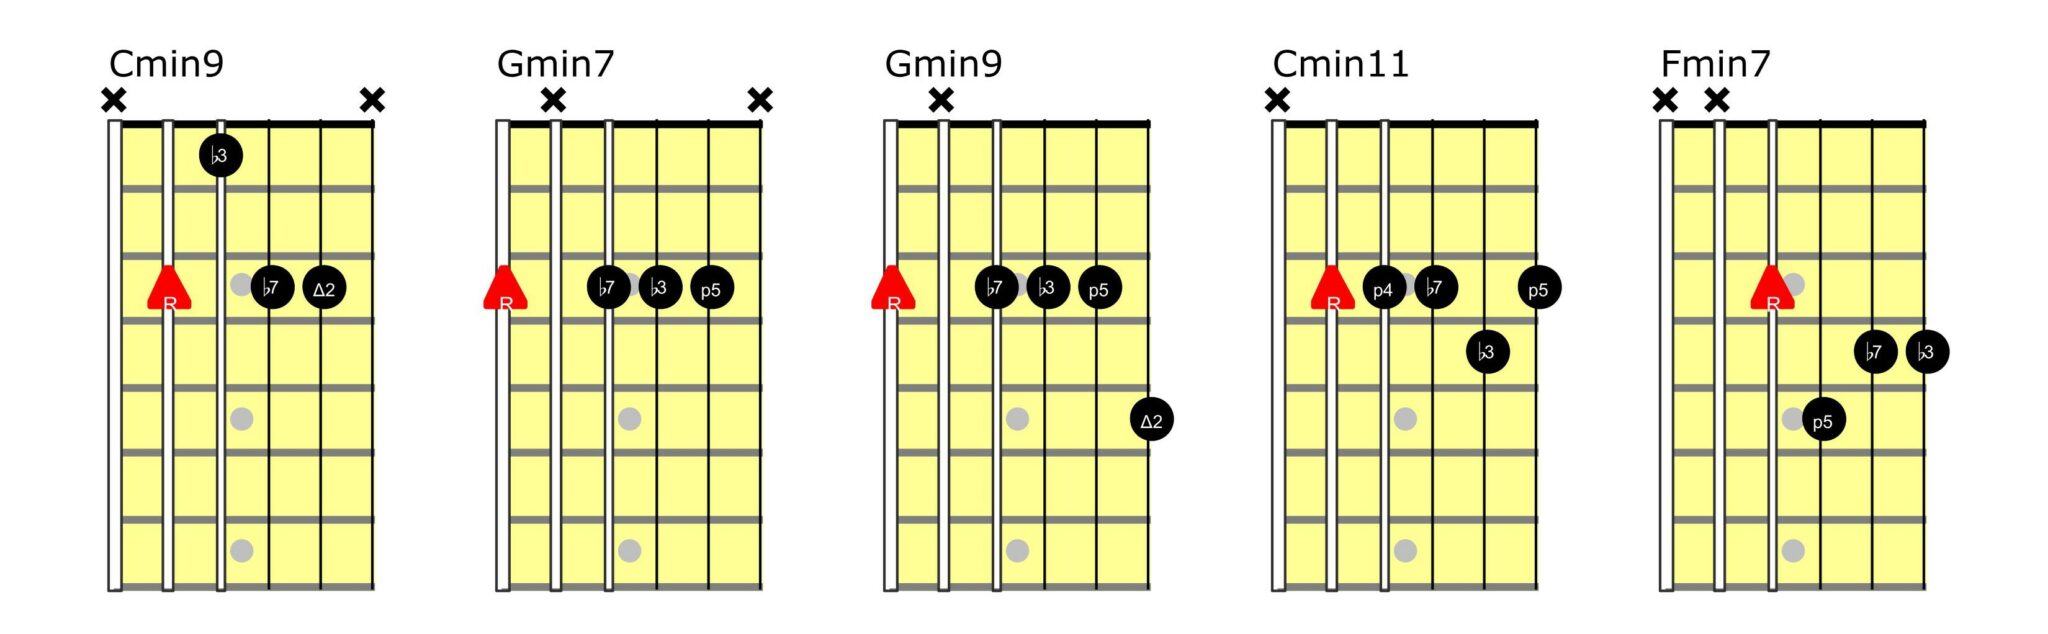 Movable Jazz Guitar Chords Chart